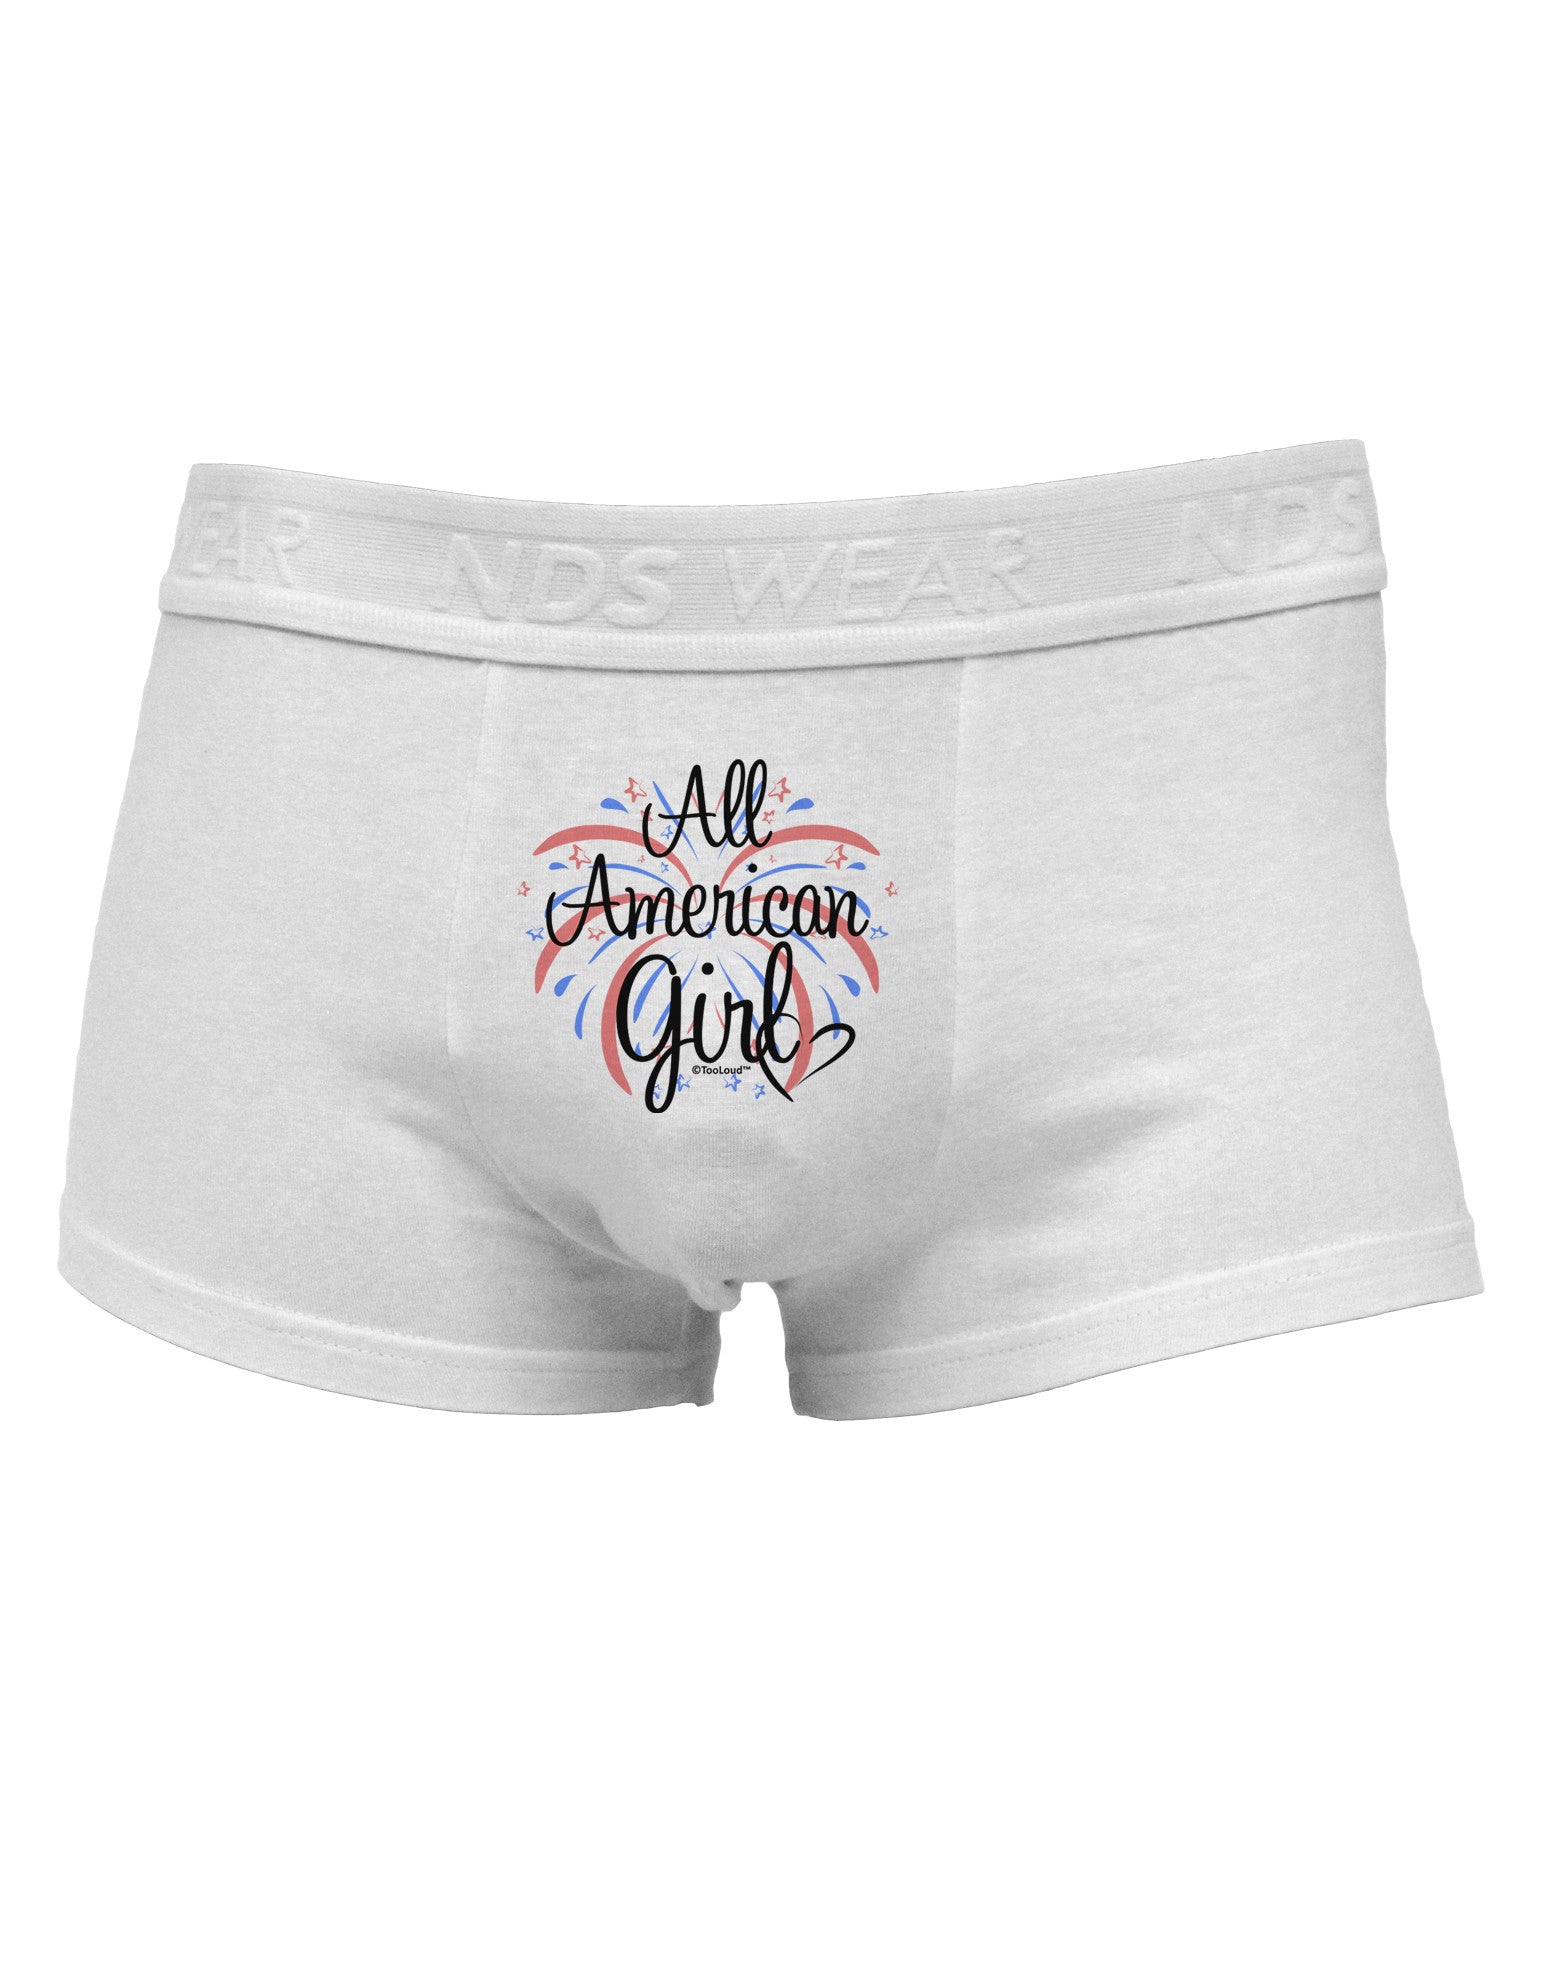 All American Girl - Fireworks and Heart Mens Cotton Trunk Underwear by -  Davson Sales